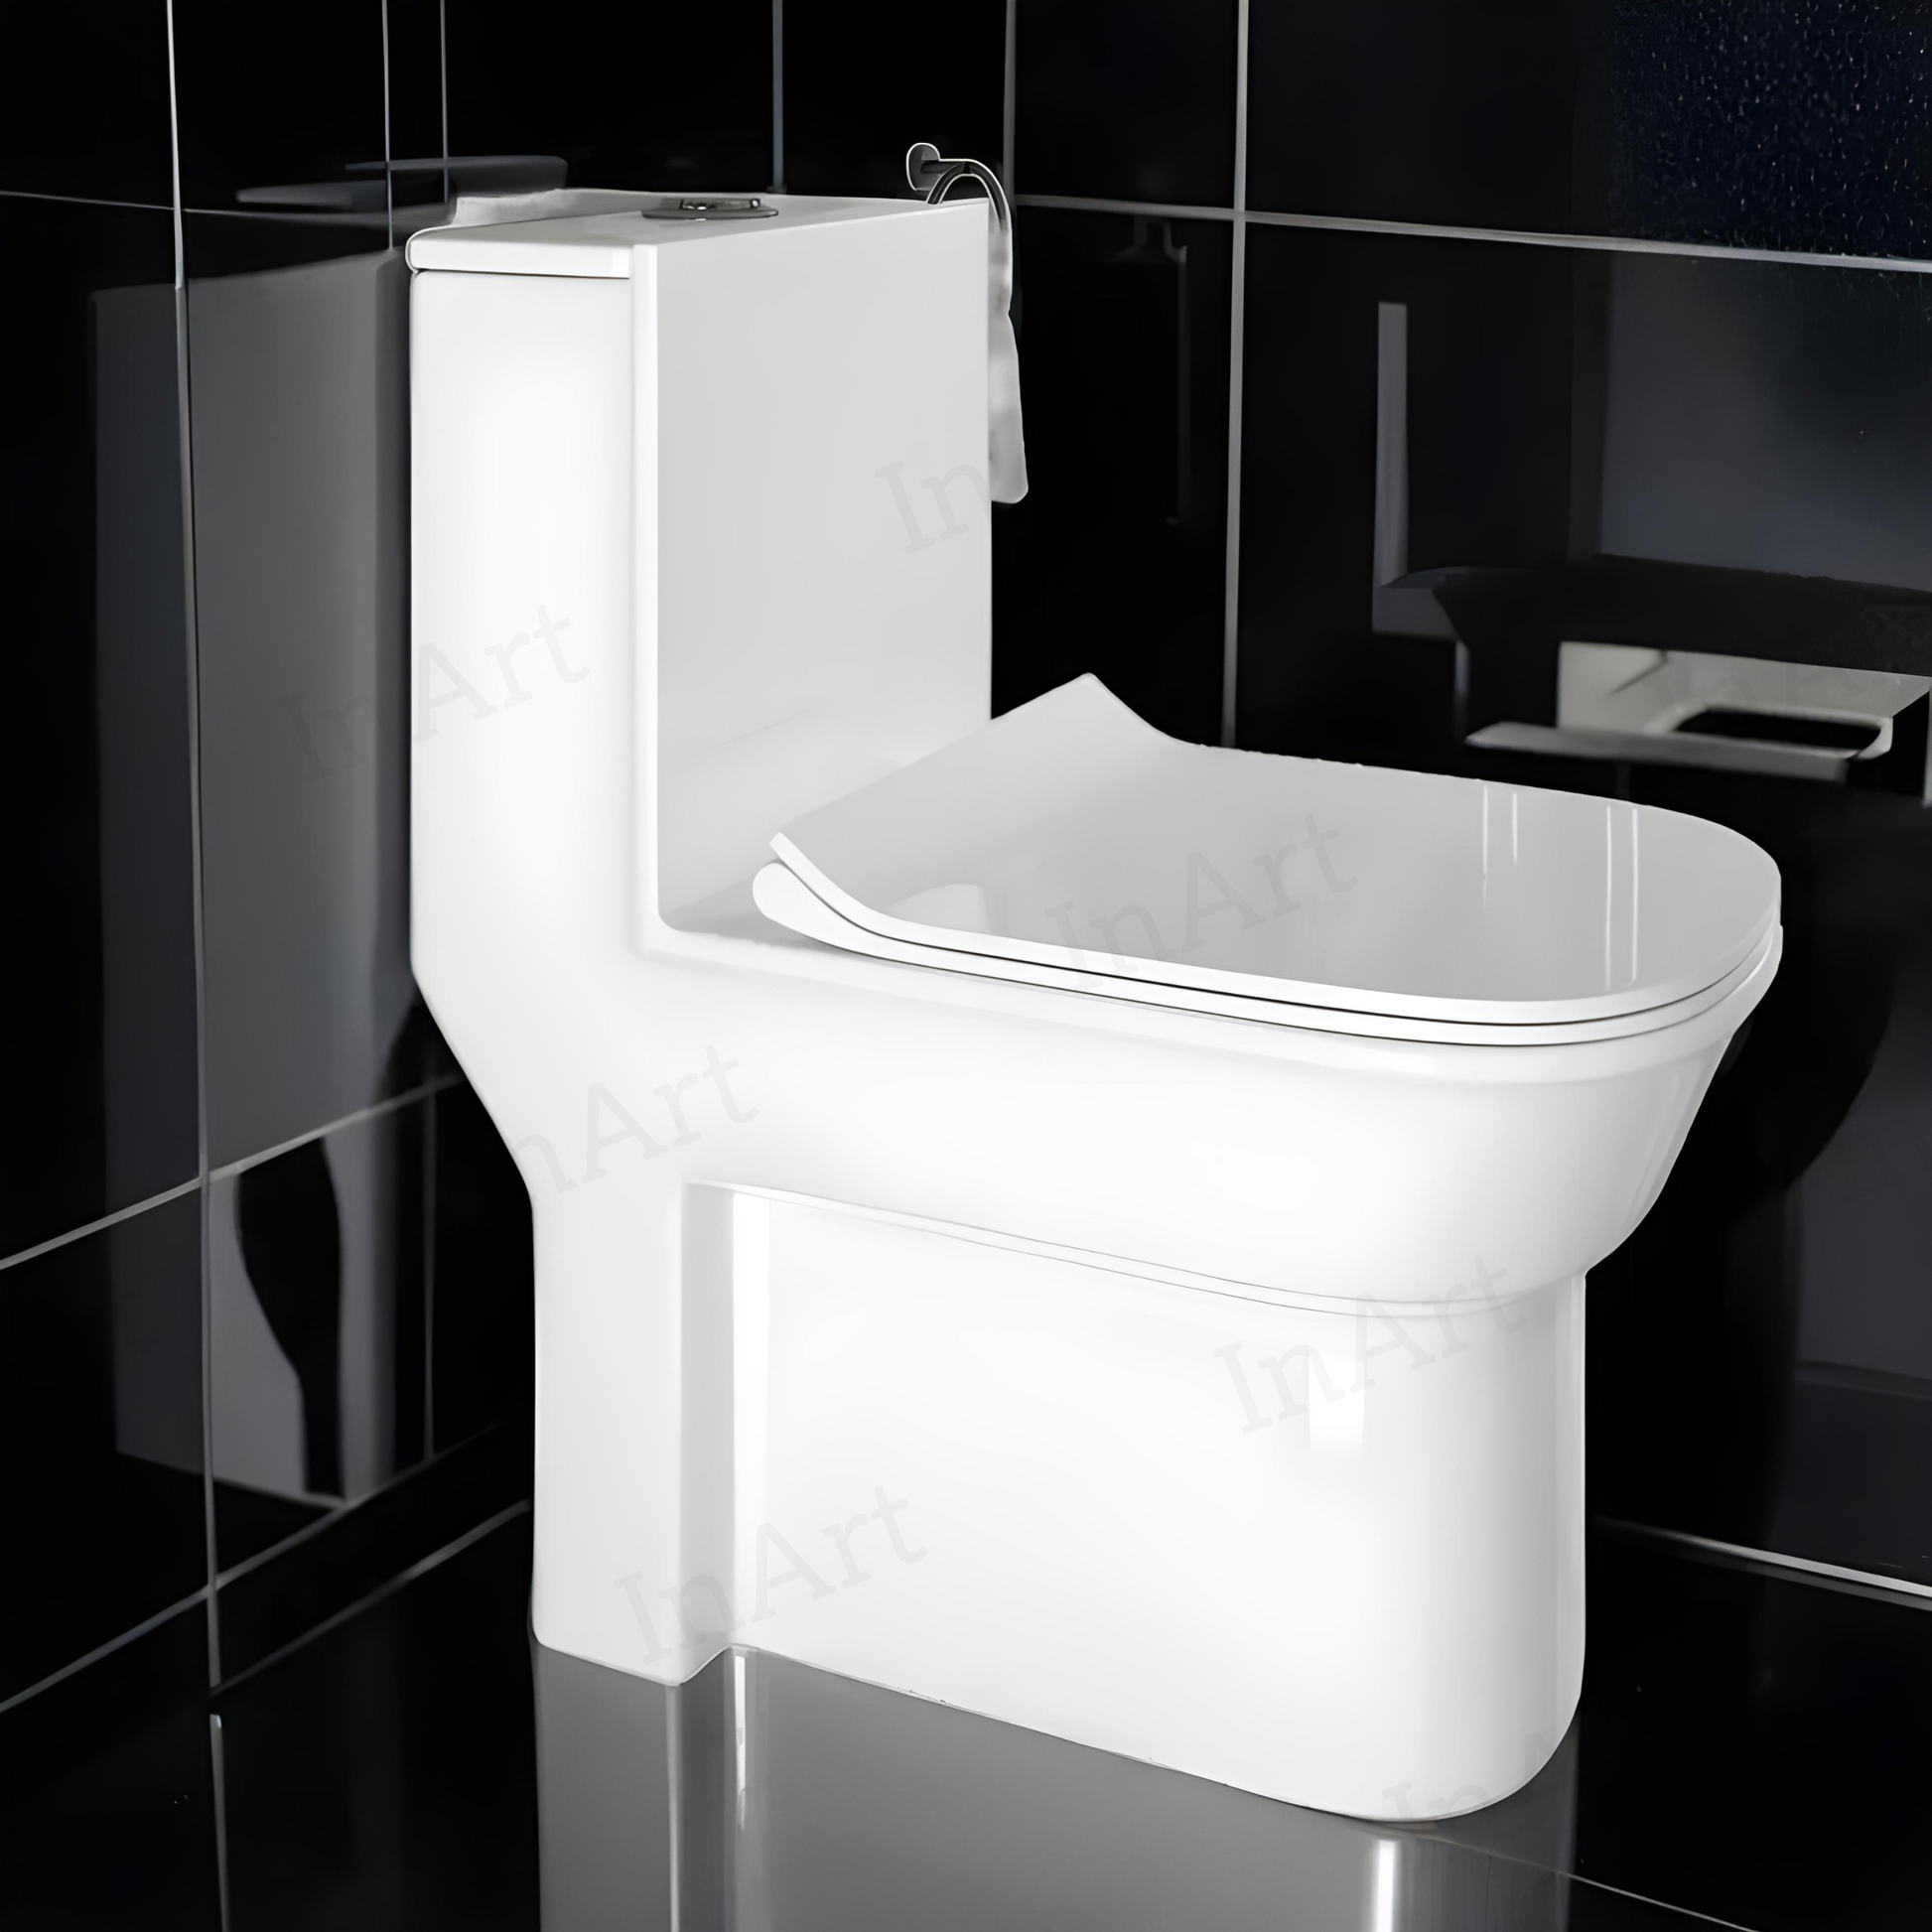 InArt Ceramic Floor-Mounted European Water Closet with Soft Close Hydraulic Seat and Flush Tank - White, One Piece WC Syphonic - InArt-Studio